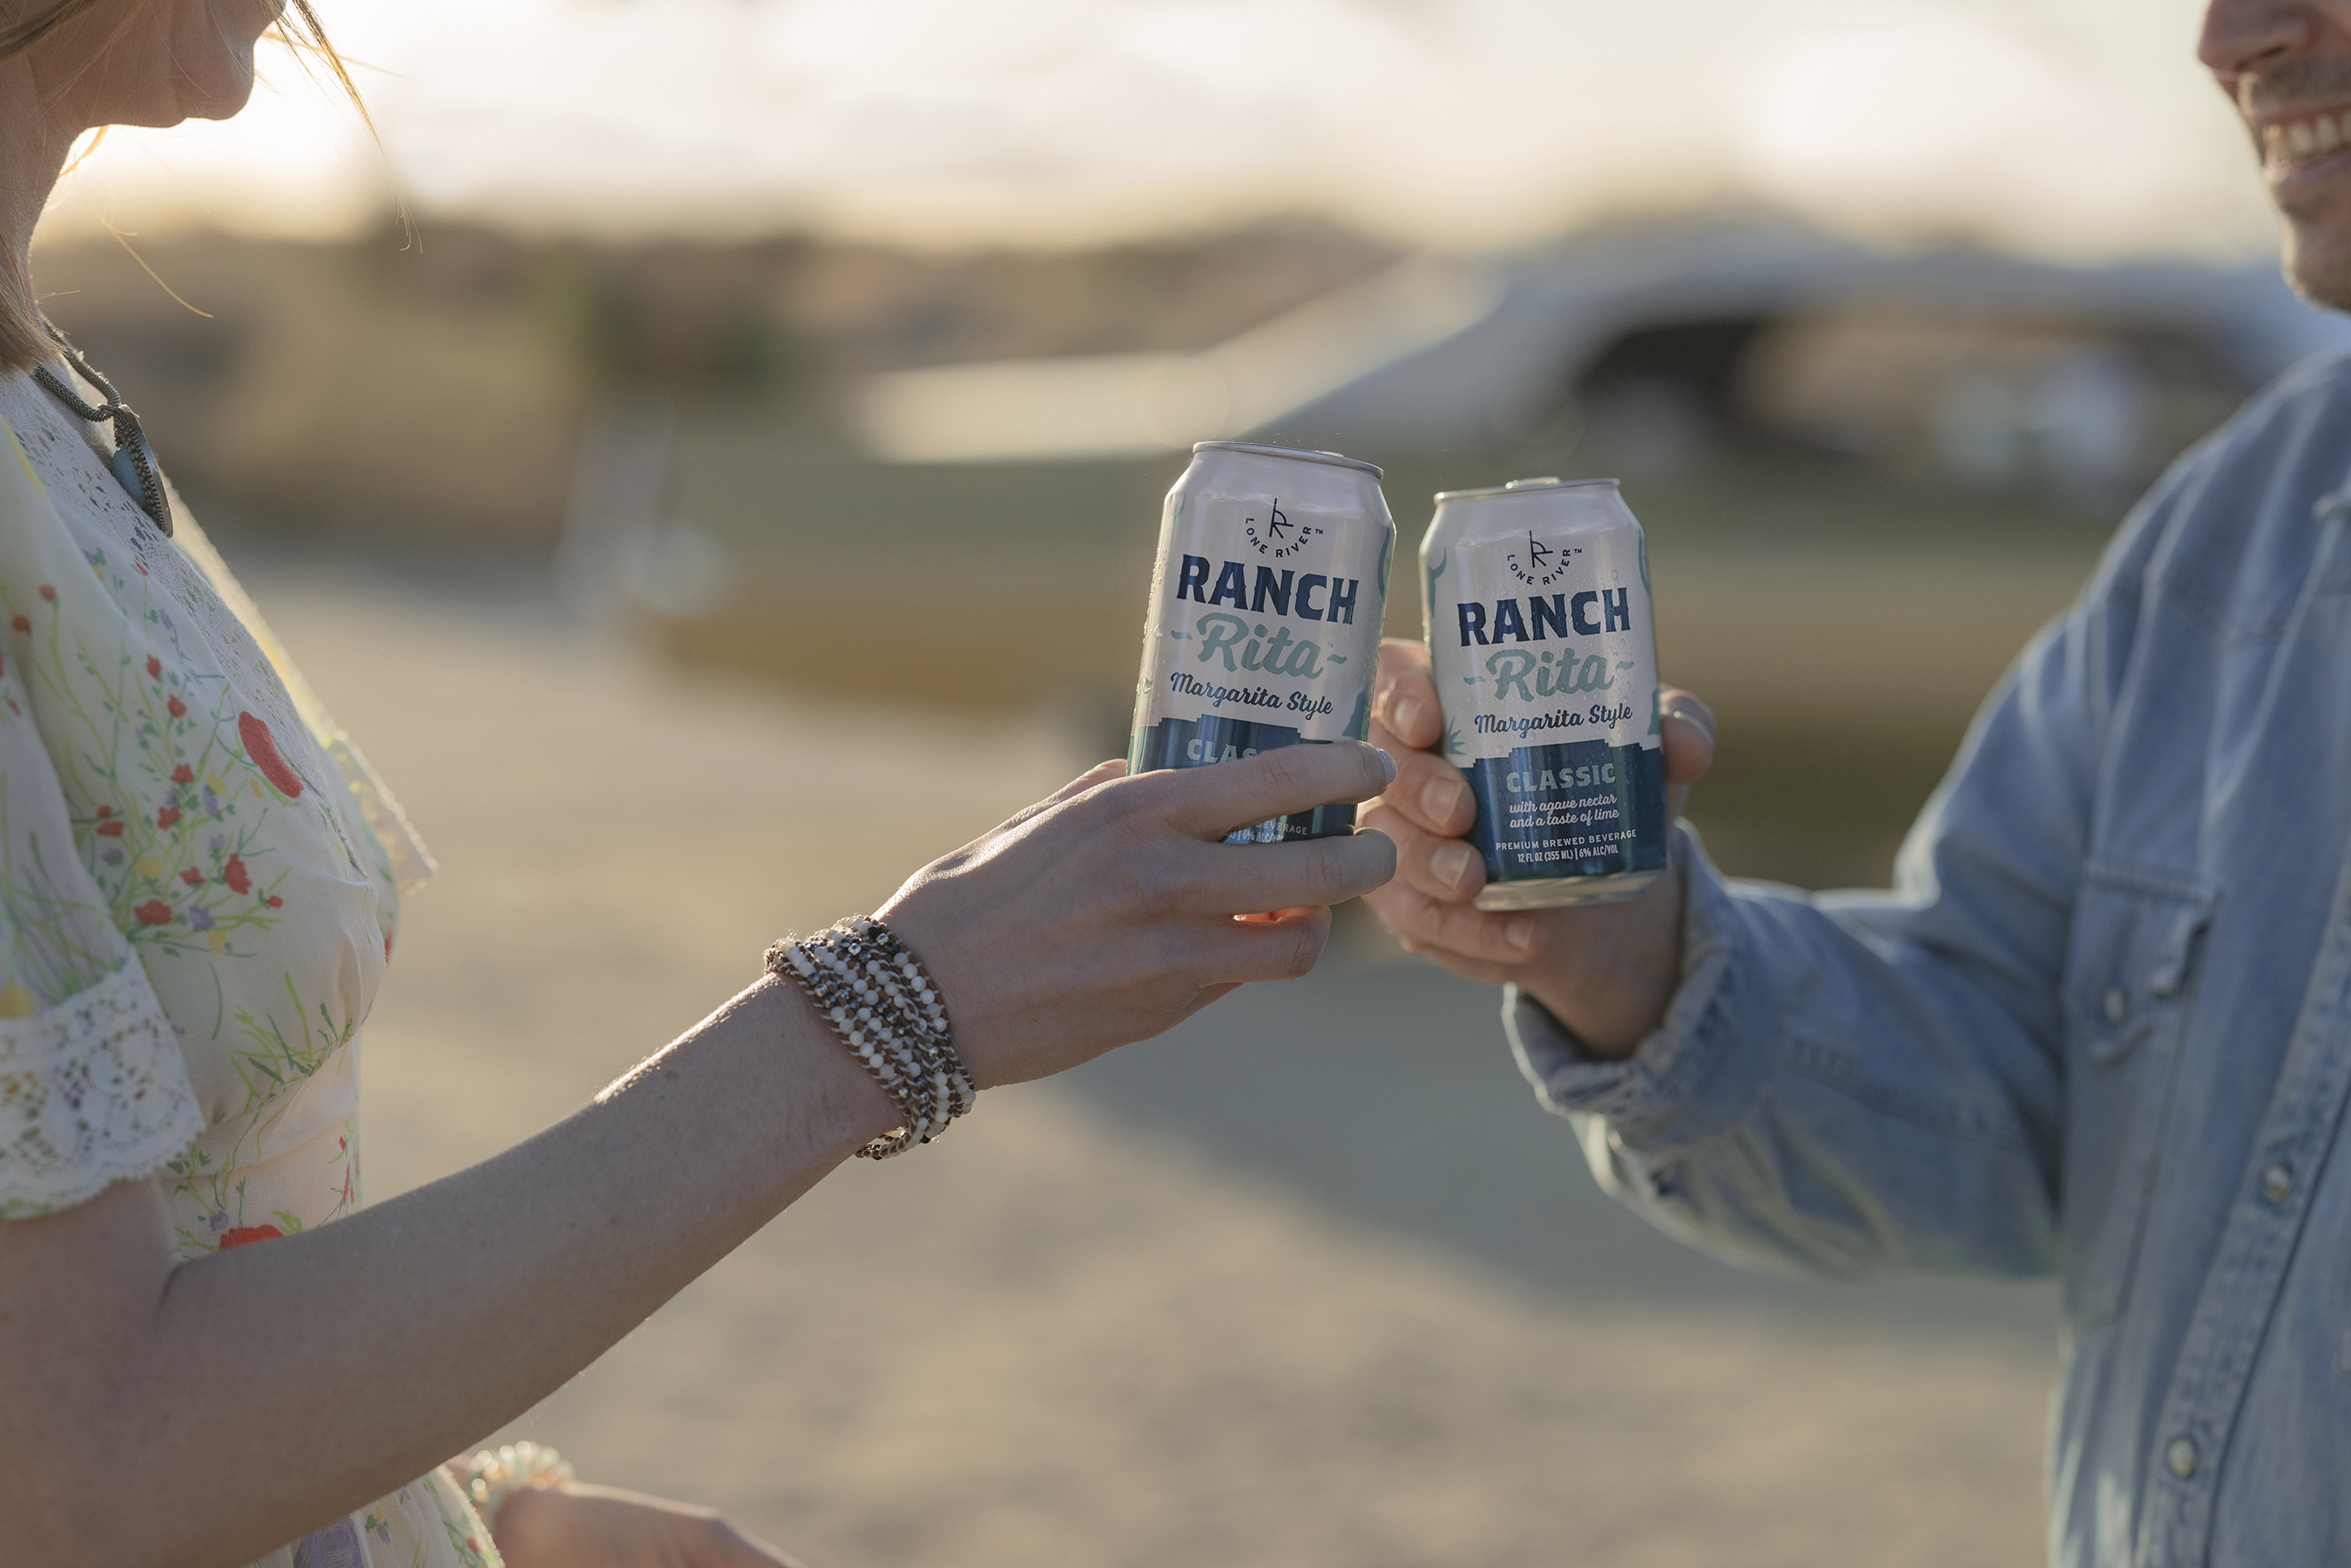 Ranch Rita joins the full Lone River portfolio and is available at major retailers nationwide.